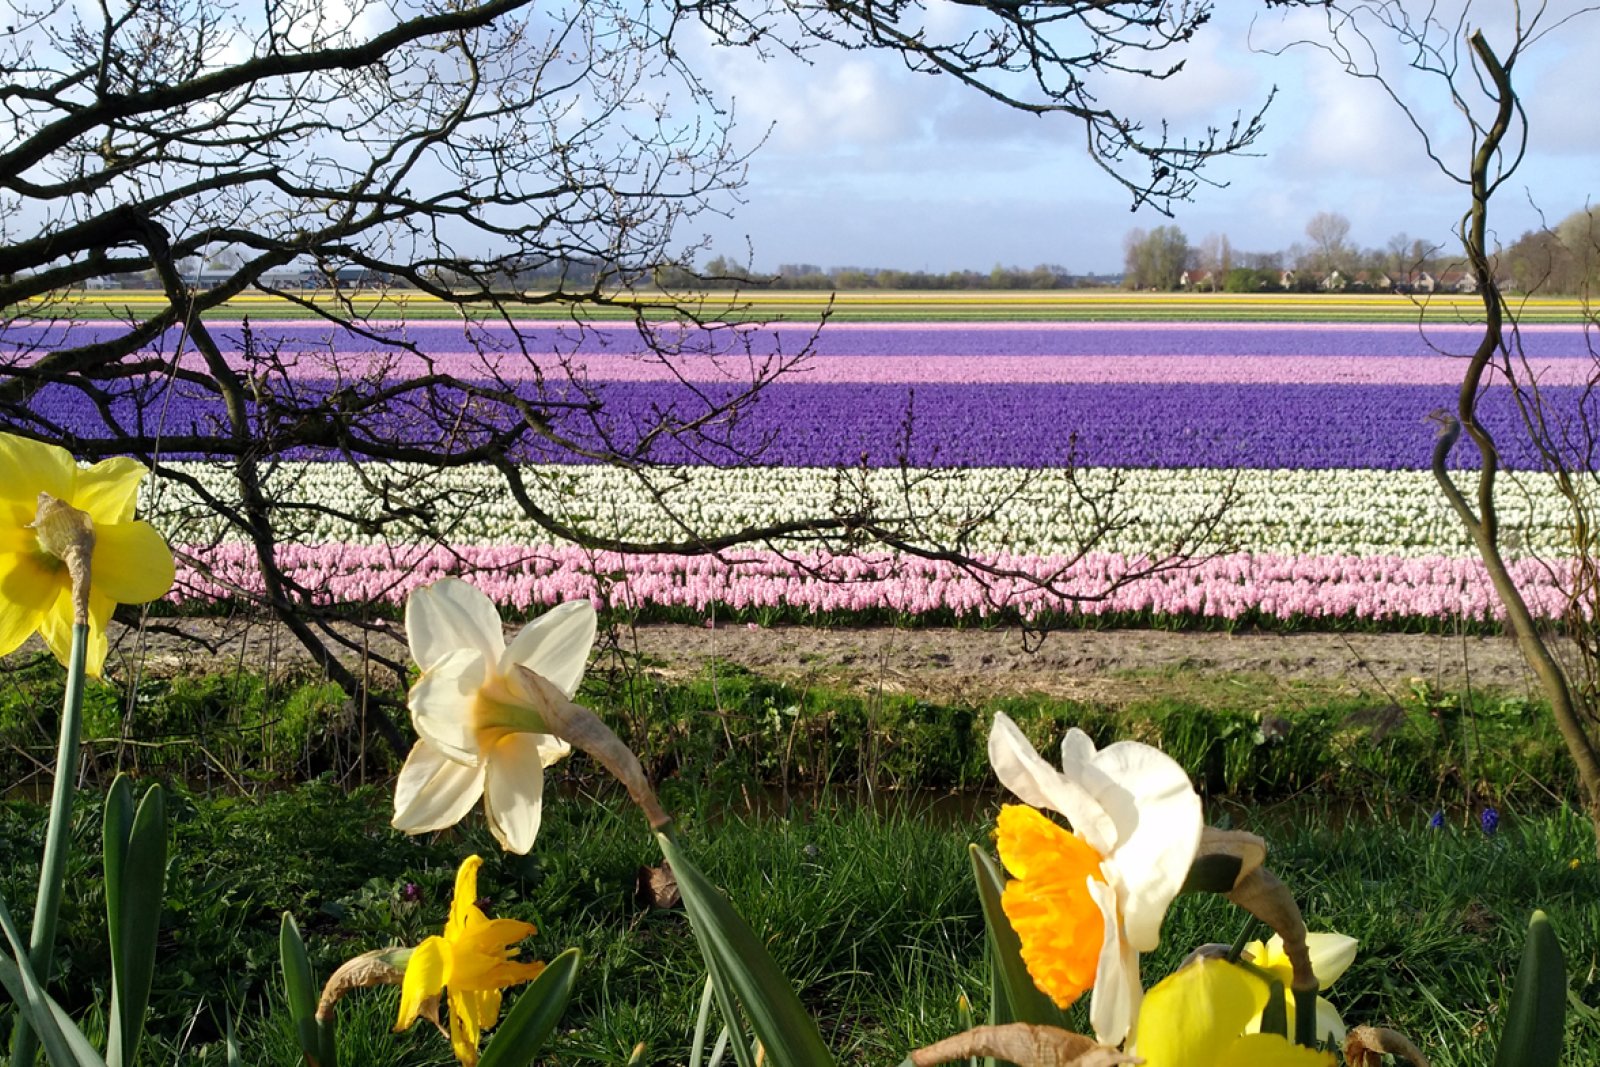 Bulb field with hyacinths and daffodils